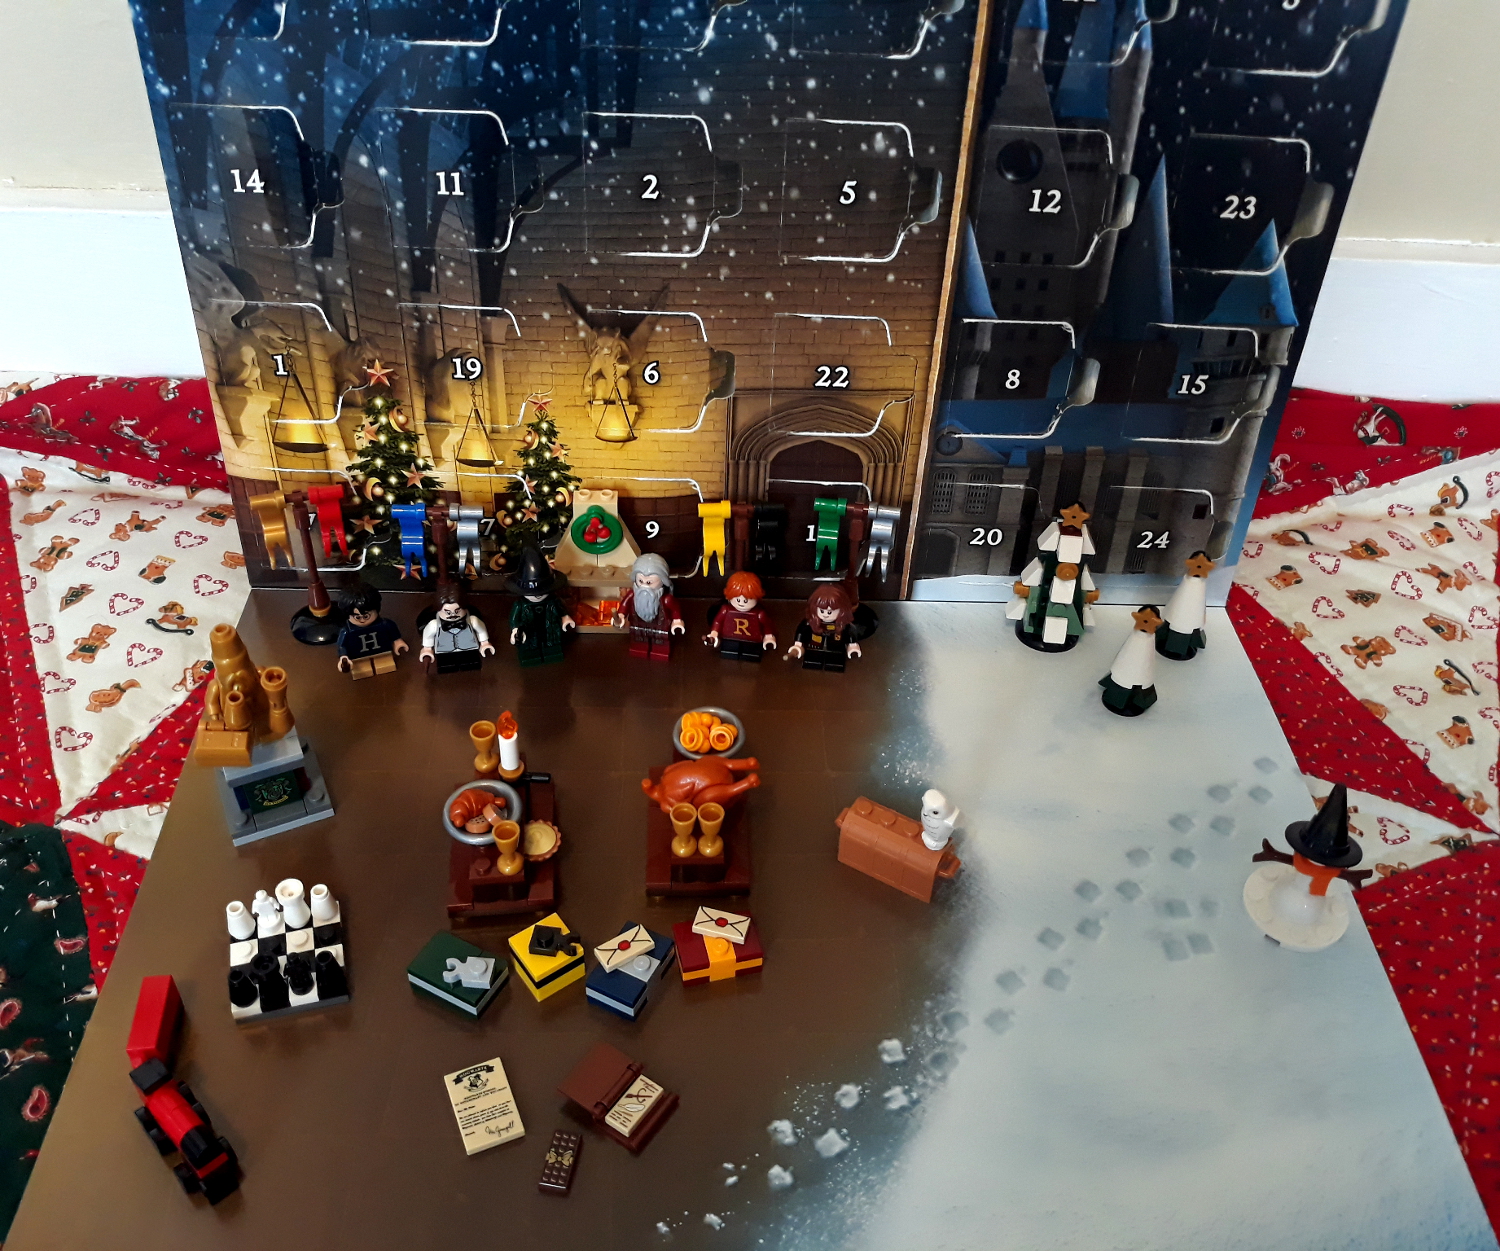 Final photo of the LEGO Harry Potter Advent Calander